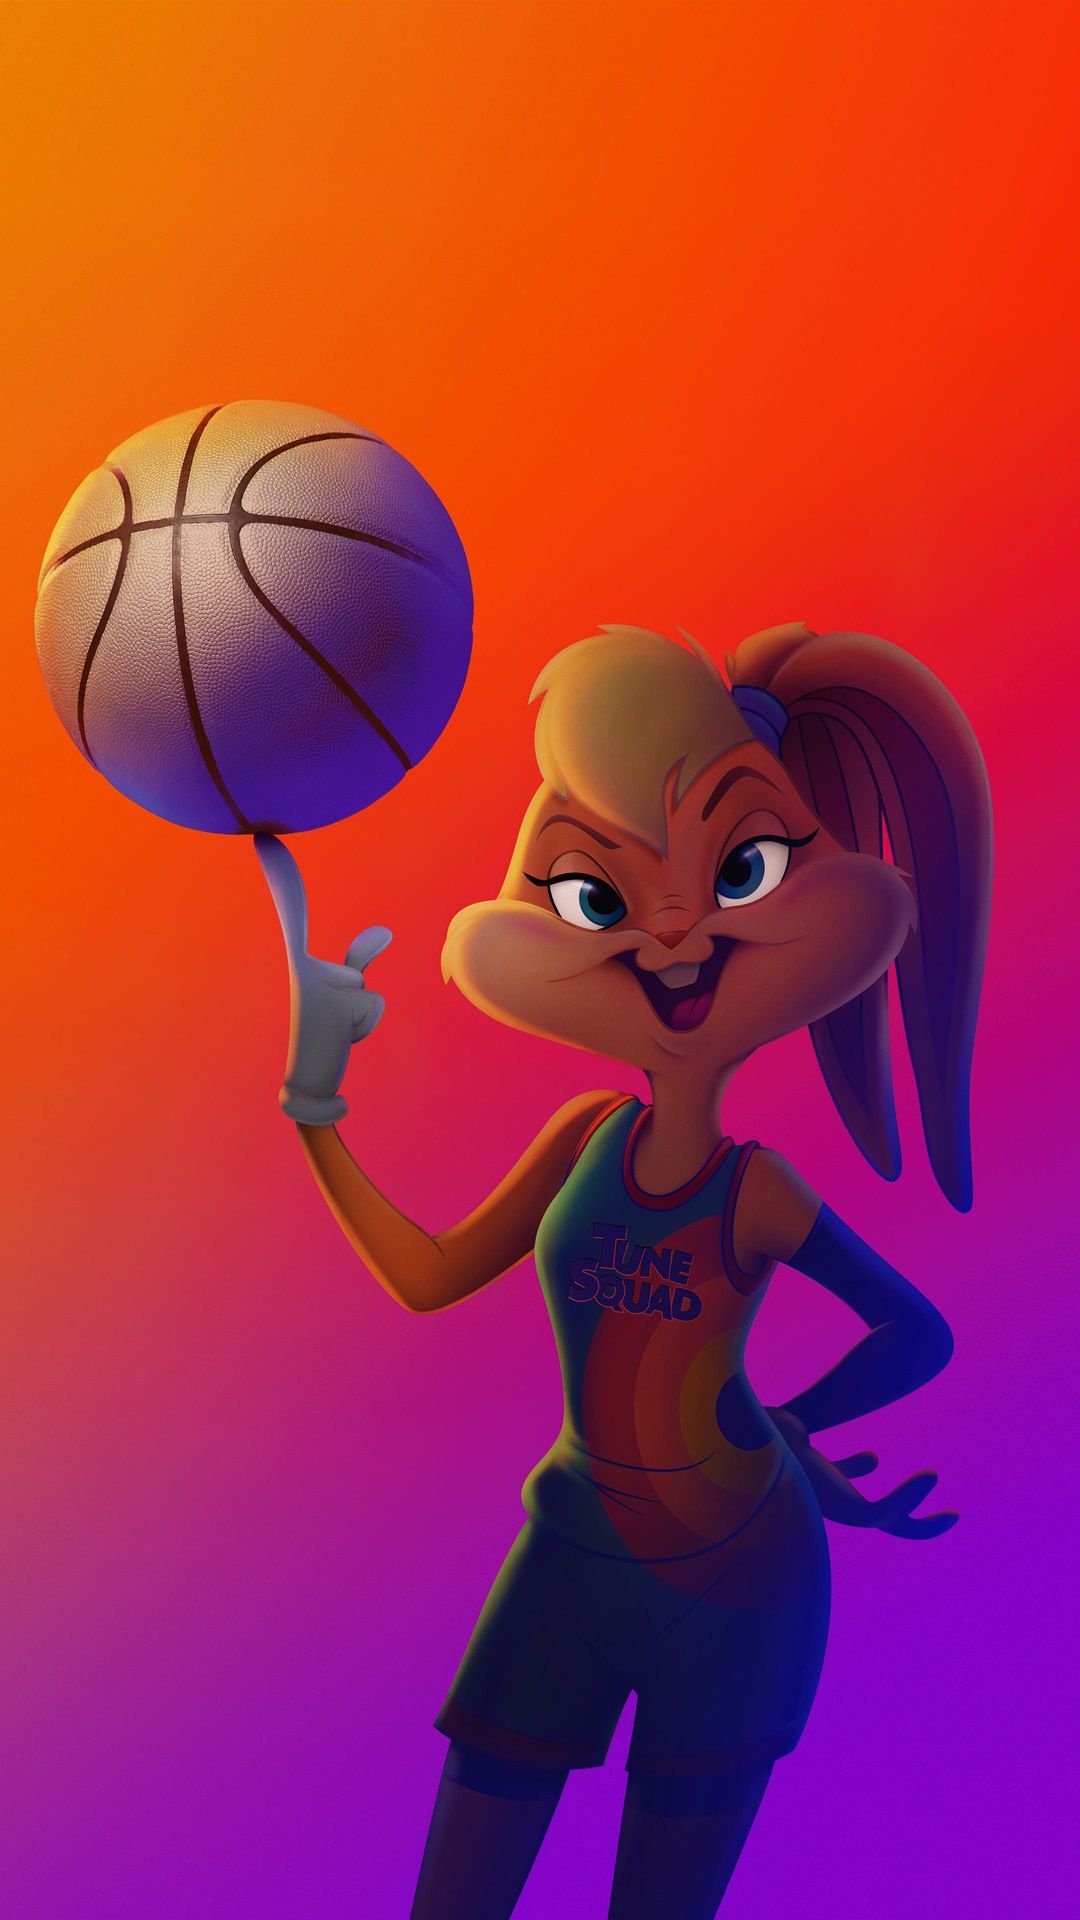 Lola Bunny from Space Jam: A New Legacy wallpaper for iPhone, Android, desktop and more. - Bugs Bunny